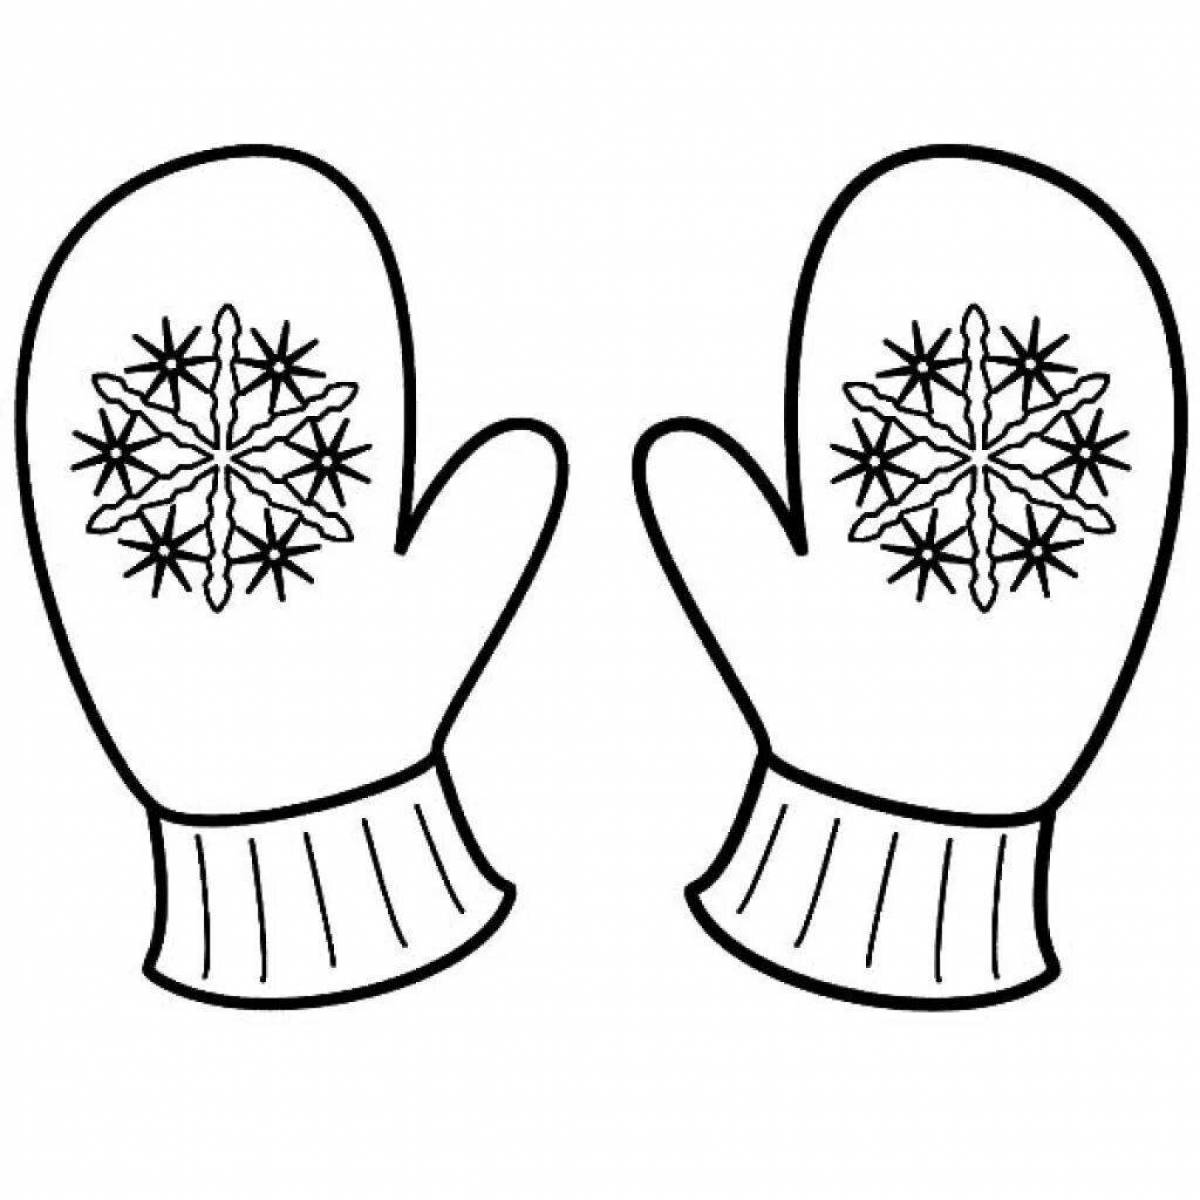 Fun mittens and hat coloring book for kids